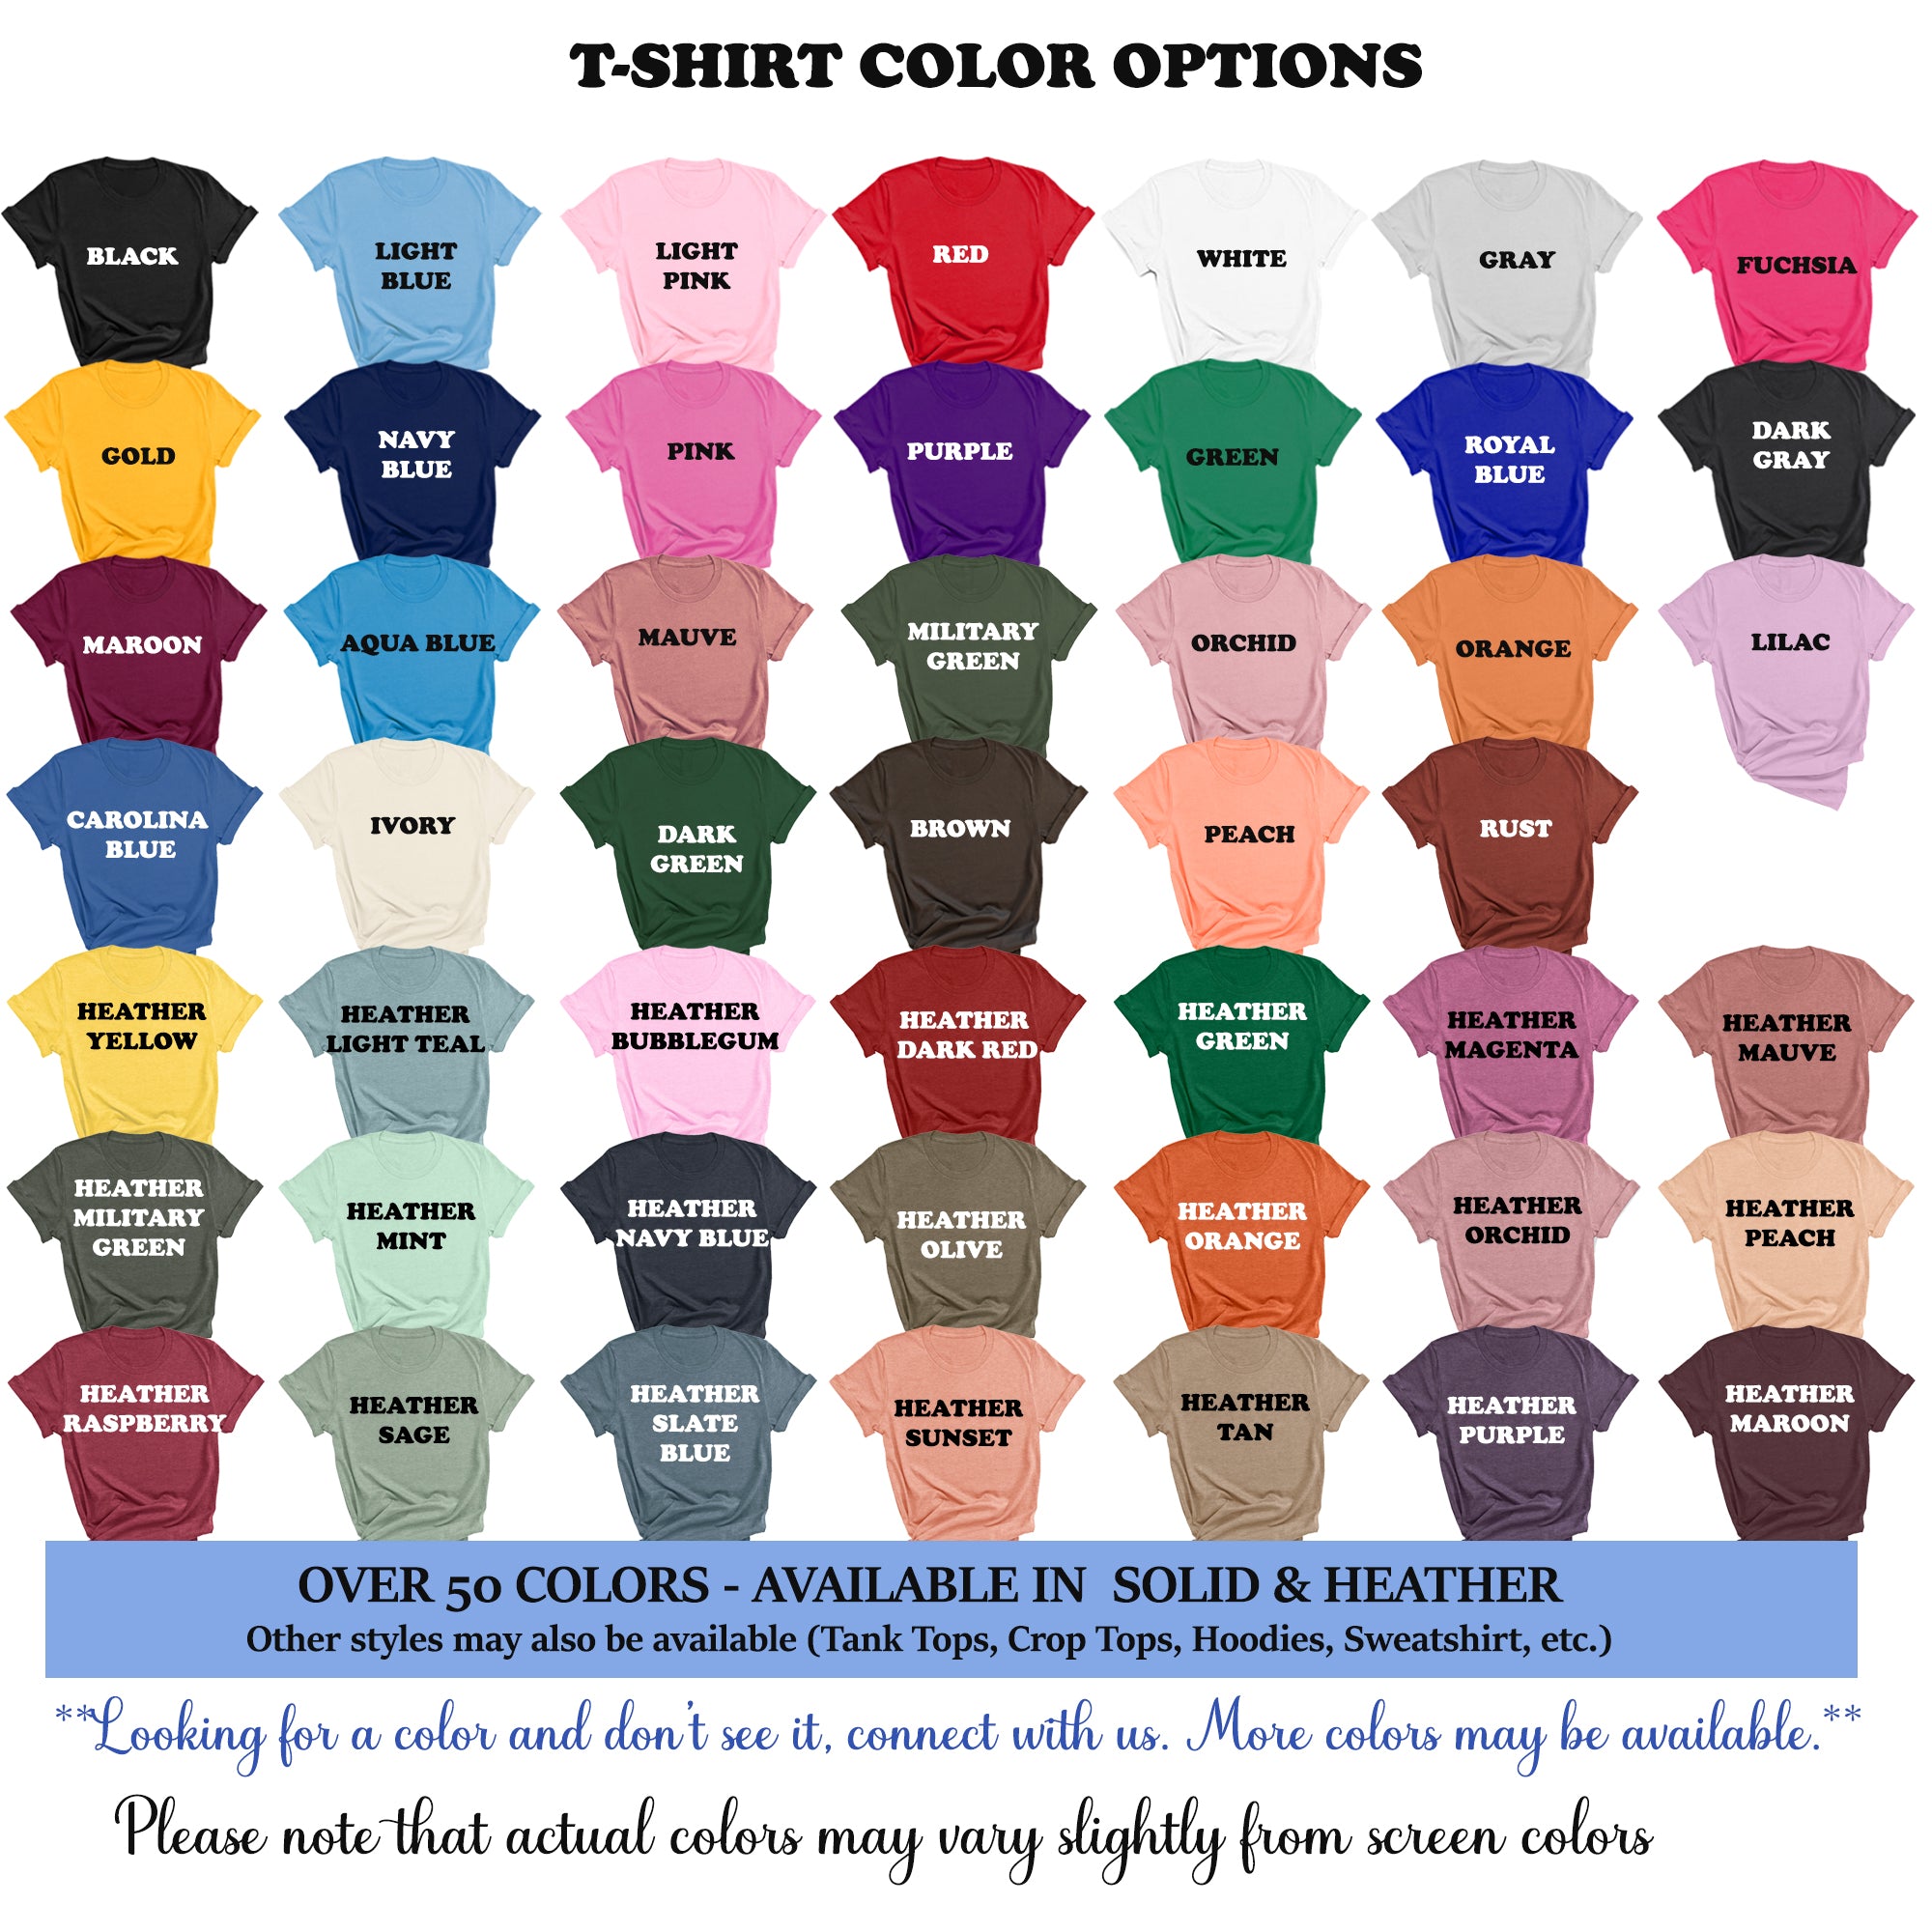 Chemo Grad T-Shirt, Tough, Brave, Proud Chemo Grad, All Ribbons, 50+ T-Shirt Colors, Cancer Awareness T-Shirts, Crewneck / XLarge from Gifts Are Blue